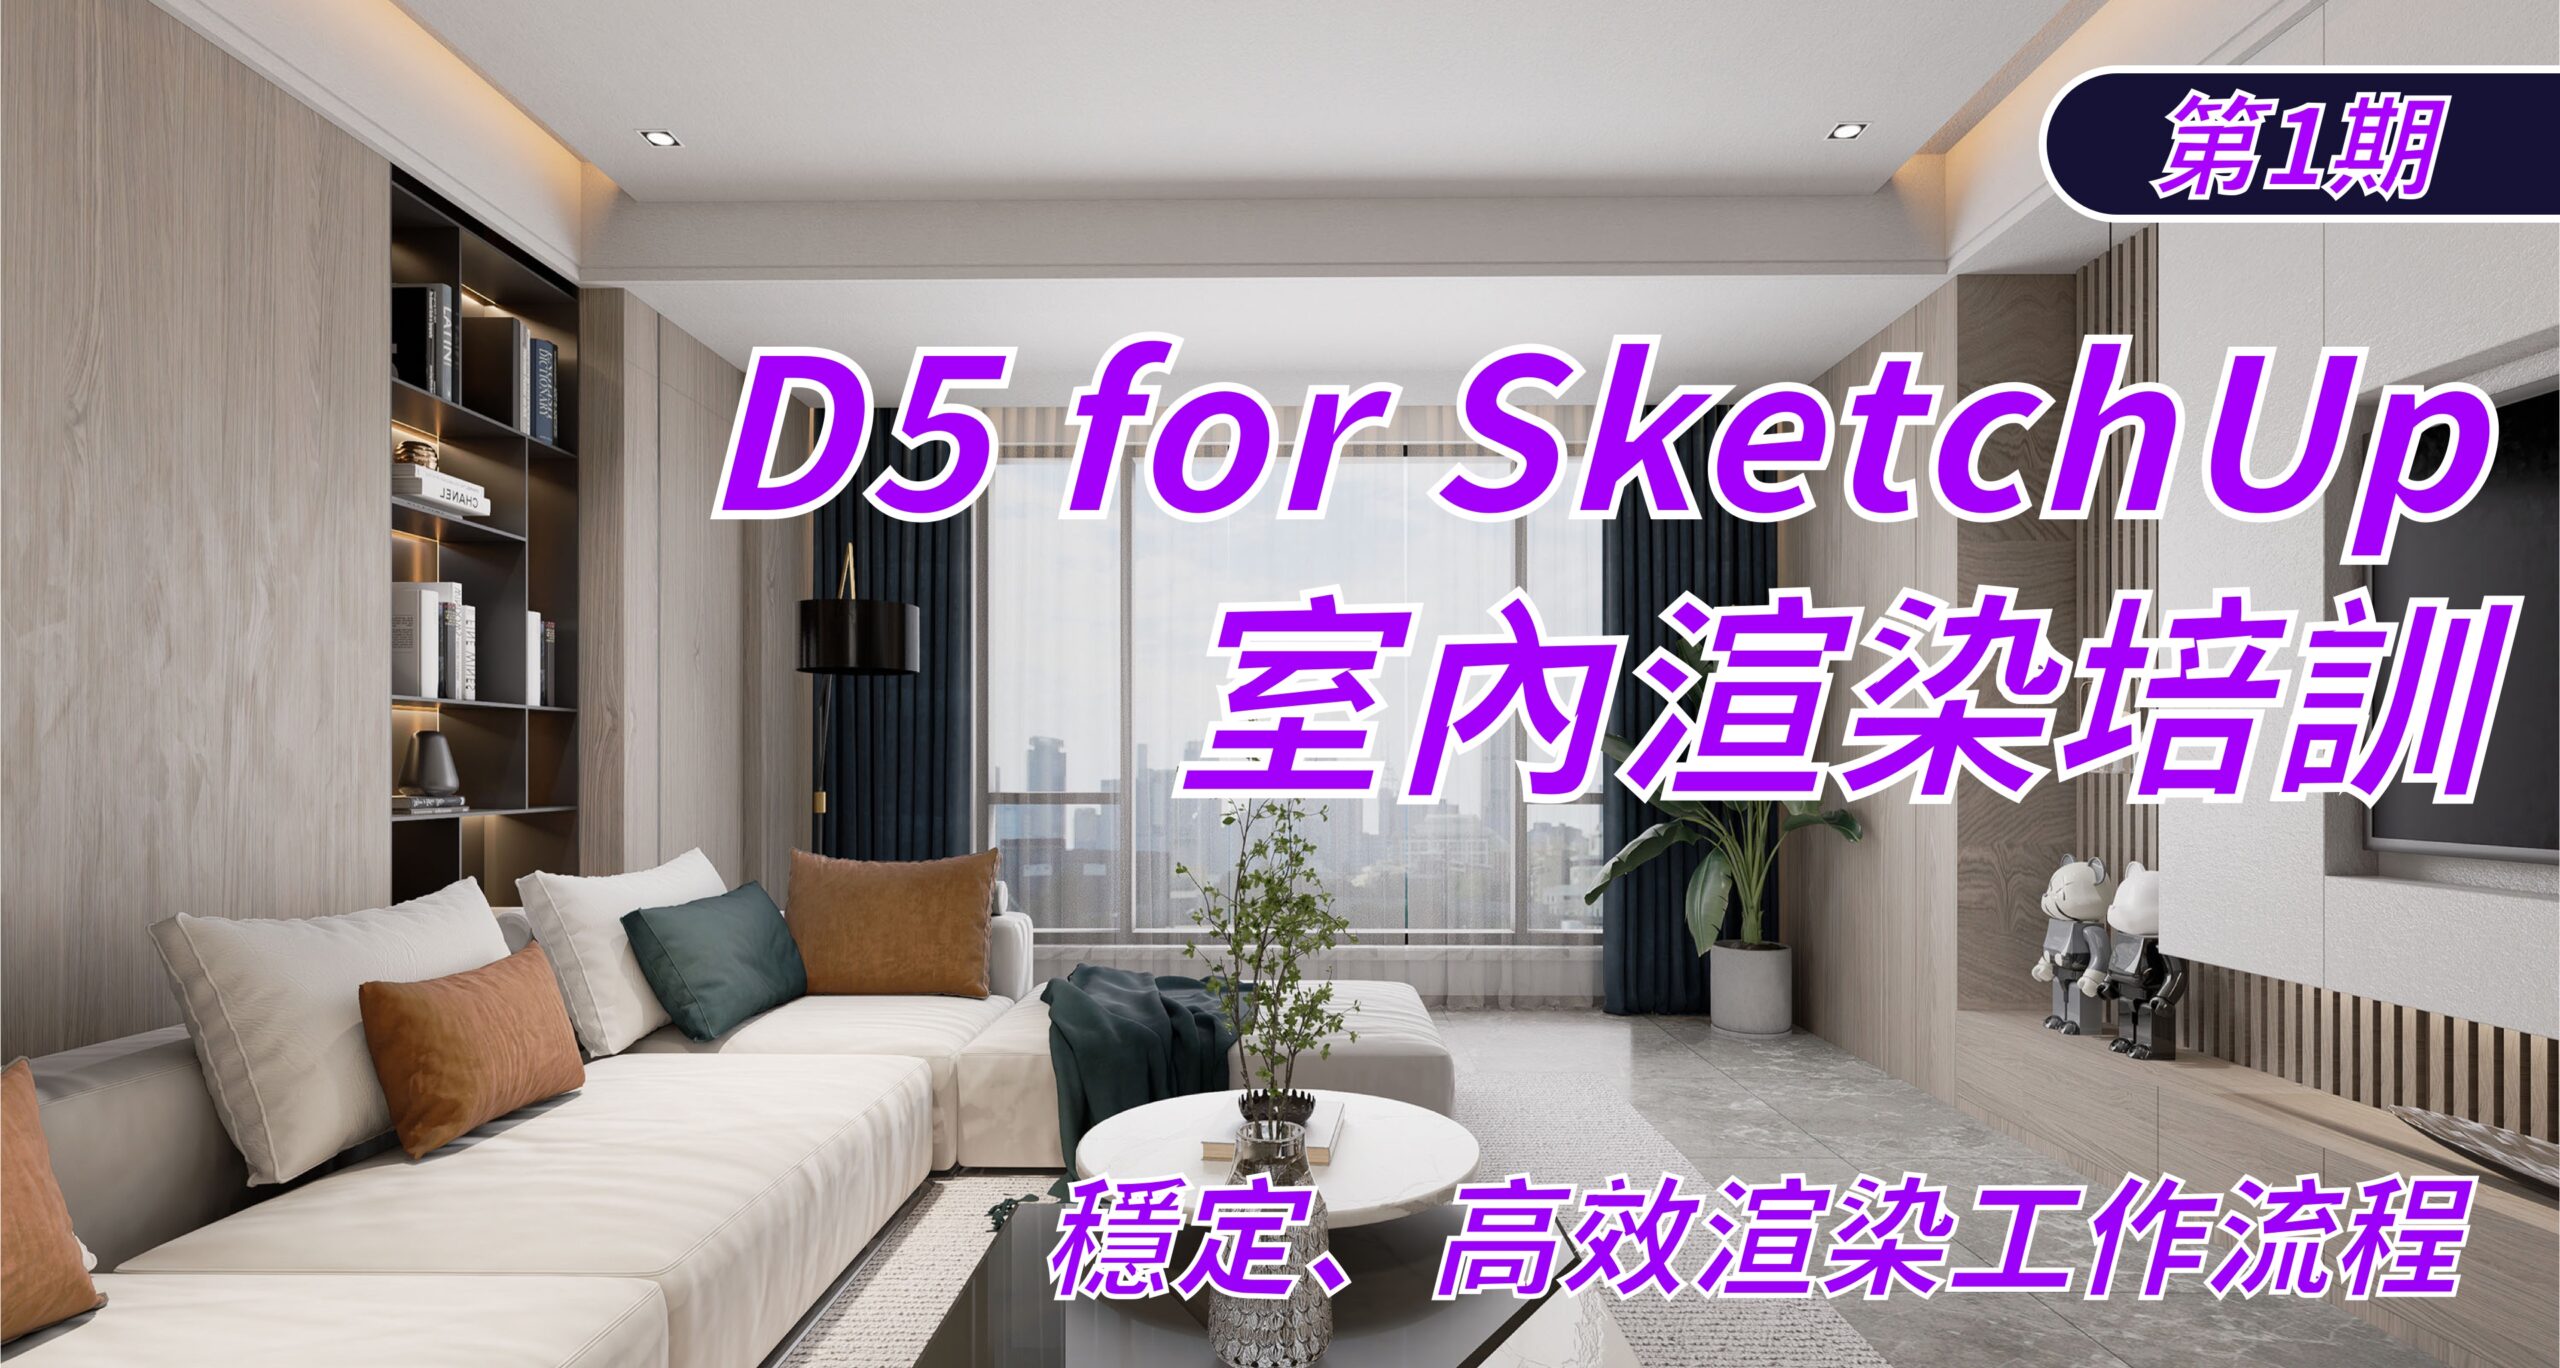 D5-for-SketchUp-室内渲染培训-scaled